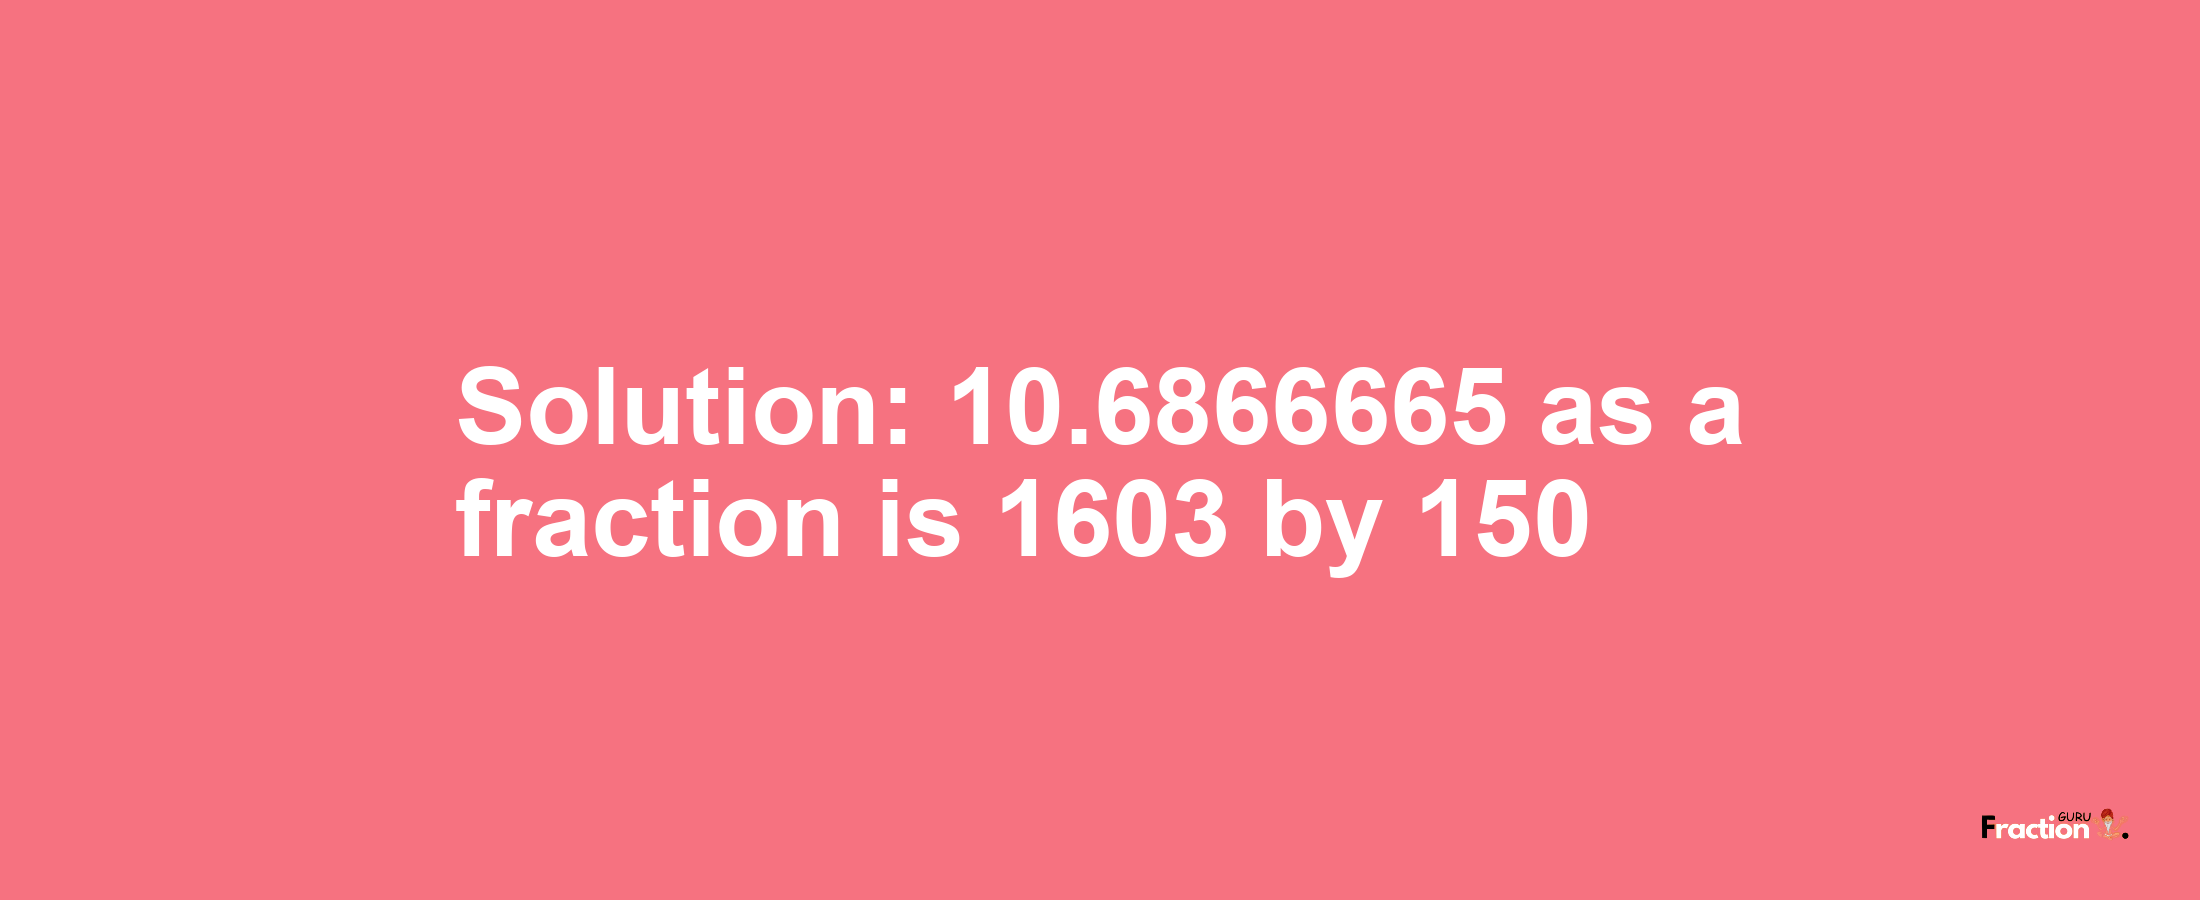 Solution:10.6866665 as a fraction is 1603/150